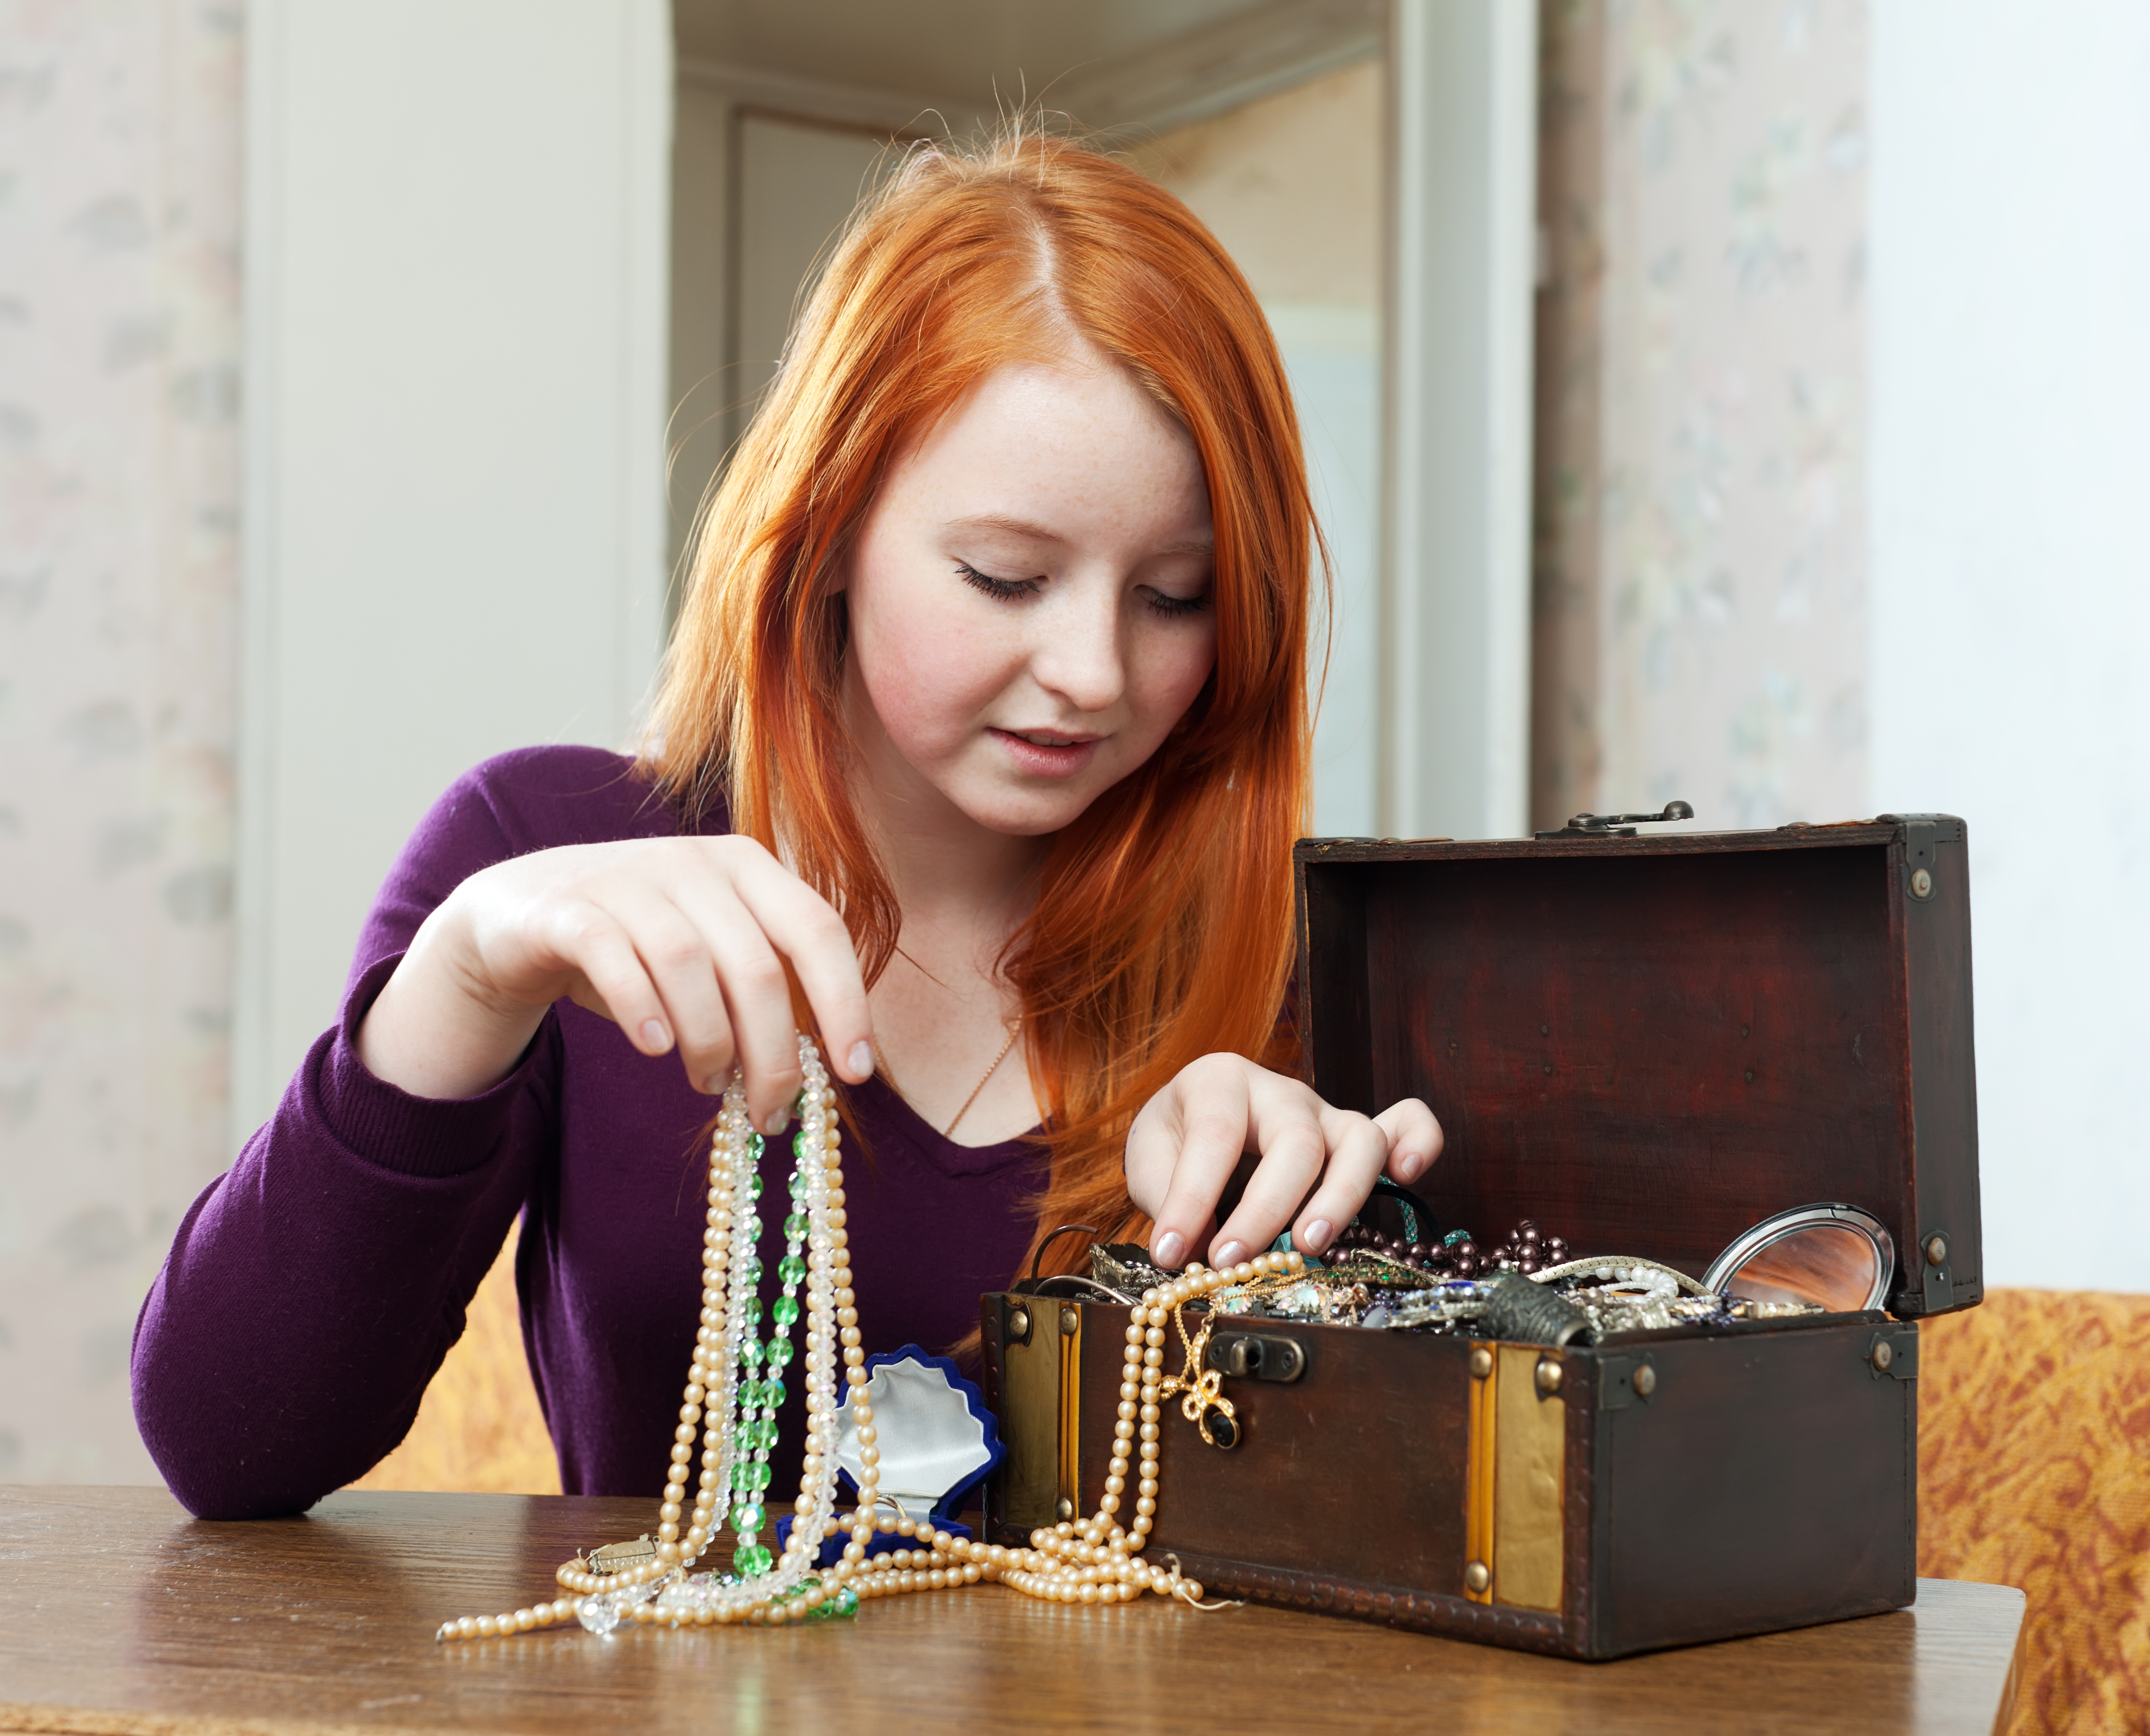 Girl wearing a purple shirt sitting at a table going through a jewelry box